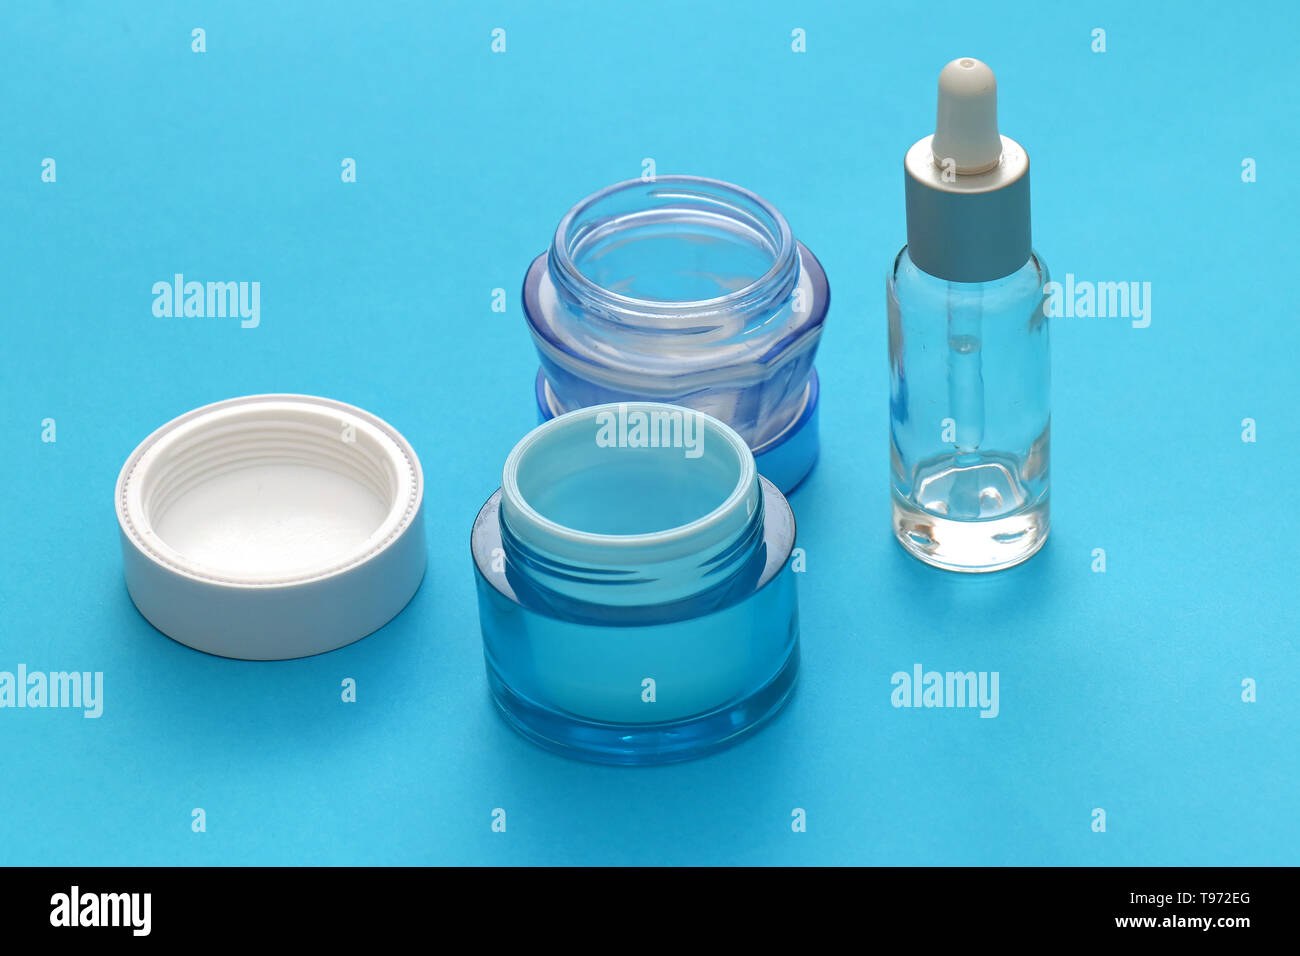 Download Cosmetics And Face Serums In Glass Jars On Blue Background Stock Photo Alamy Yellowimages Mockups